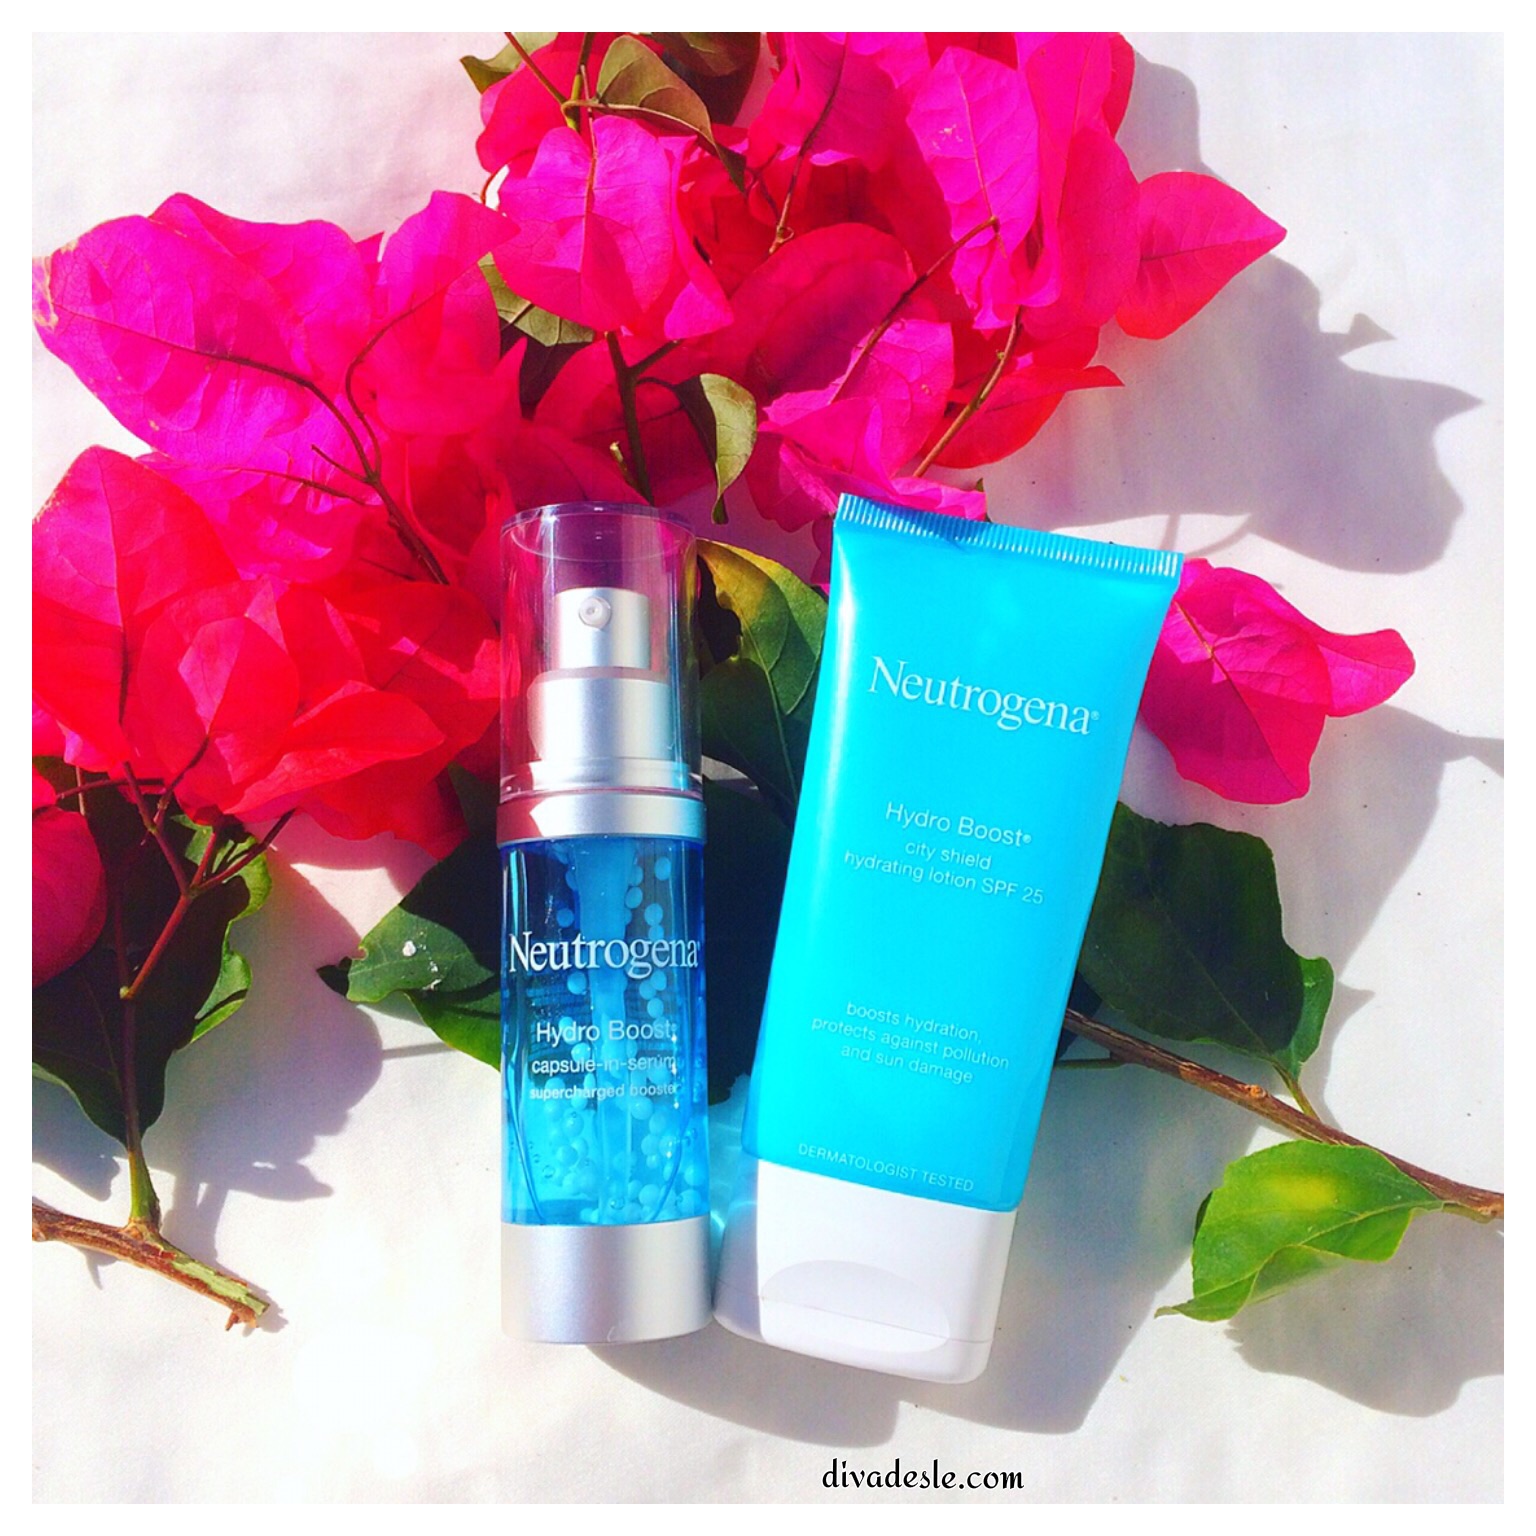 Neutrogena Hydro Boost Capsule Serum and City Shield Hydrating Lotion Review - Diva